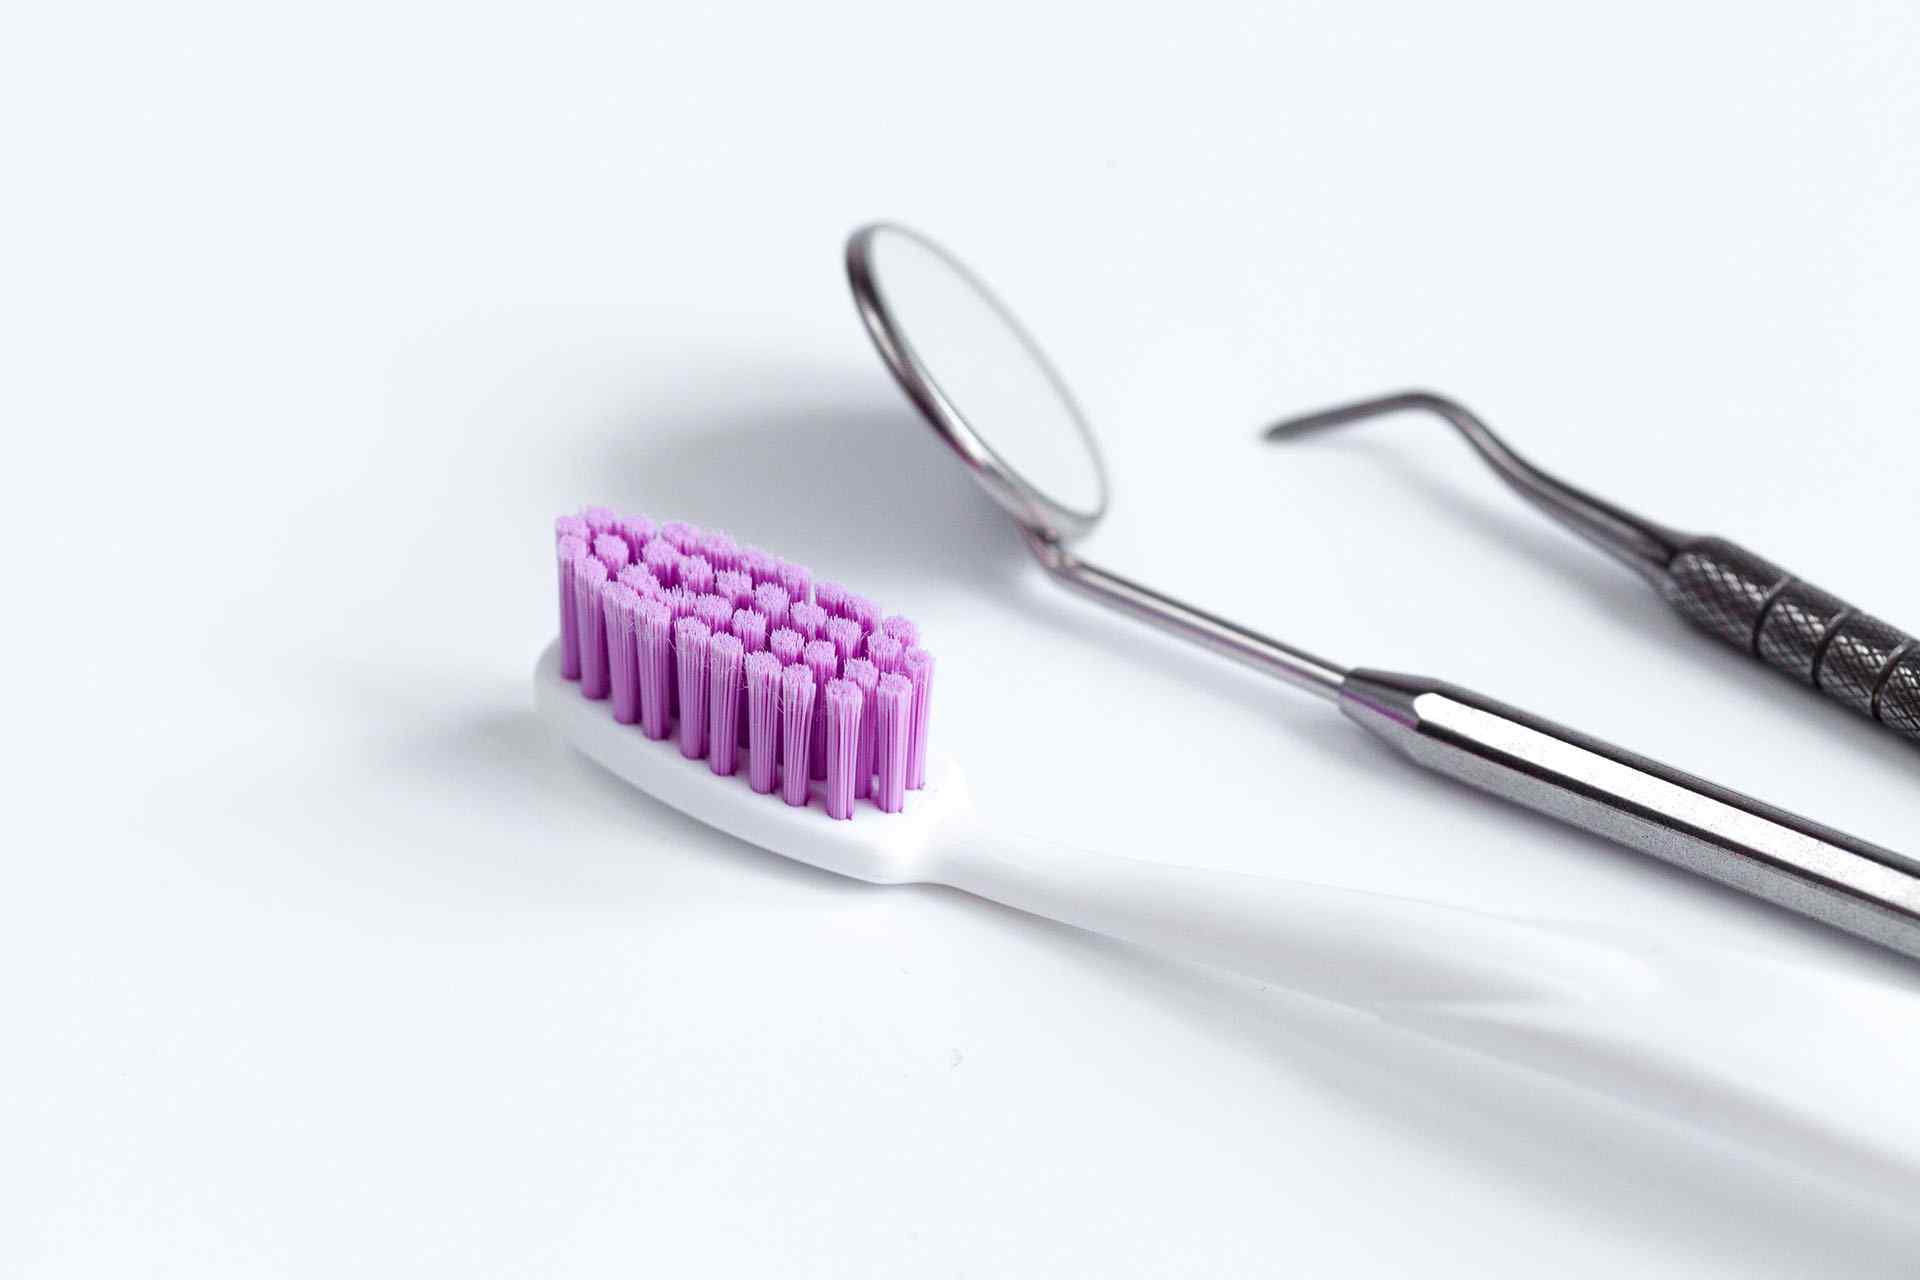 A purple toothbrush and mirror on top of white surface.